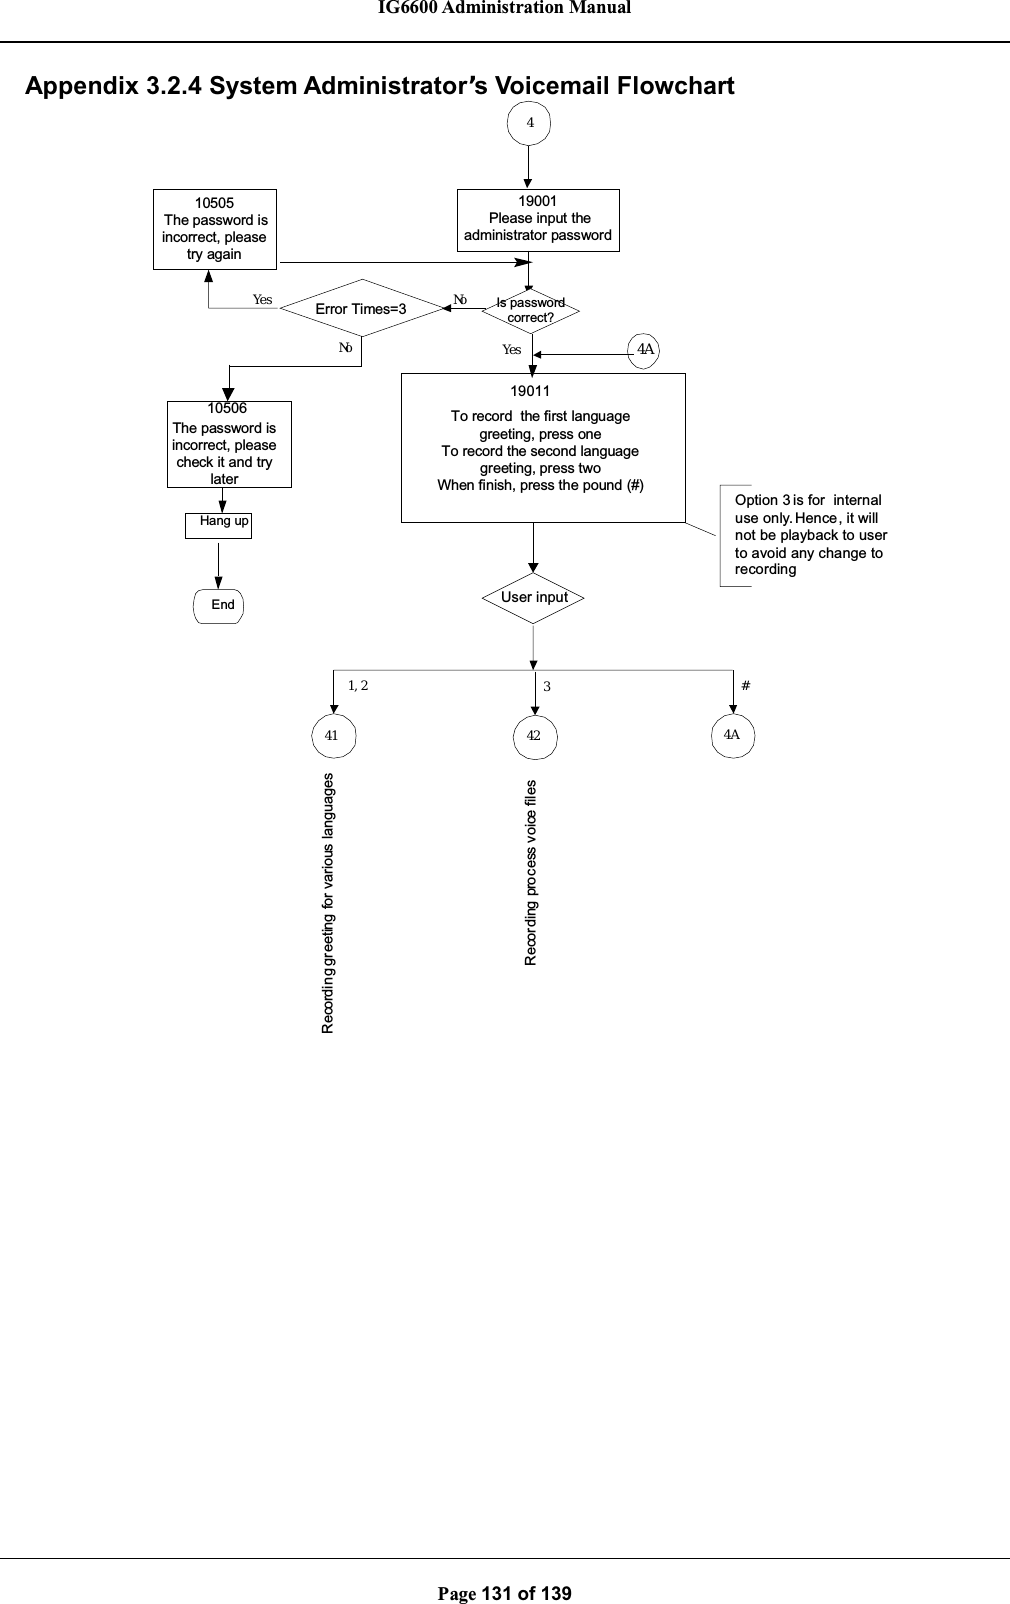 IG6600 Administration ManualPage 131 of 139Appendix 3.2.4 System Administrator’s Voicemail Flowchart4Yes Is passwordcorrect?YesHang upEndNo19011Option 3 is for internaluse only.Hence, it willnot be playback to userto avoid any change torecordingUser input4ANo#1,241 4ARecording greeting for various languages342Recording process voice files19001Please input theadministrator password10505The password isincorrect, pleasetry againError Times=310506Thepasswordisincorrect, pleasecheck it and trylaterTo record  the first languagegreeting, press oneTo record the second languagegreeting, press twoWhen finish, press the pound (#)